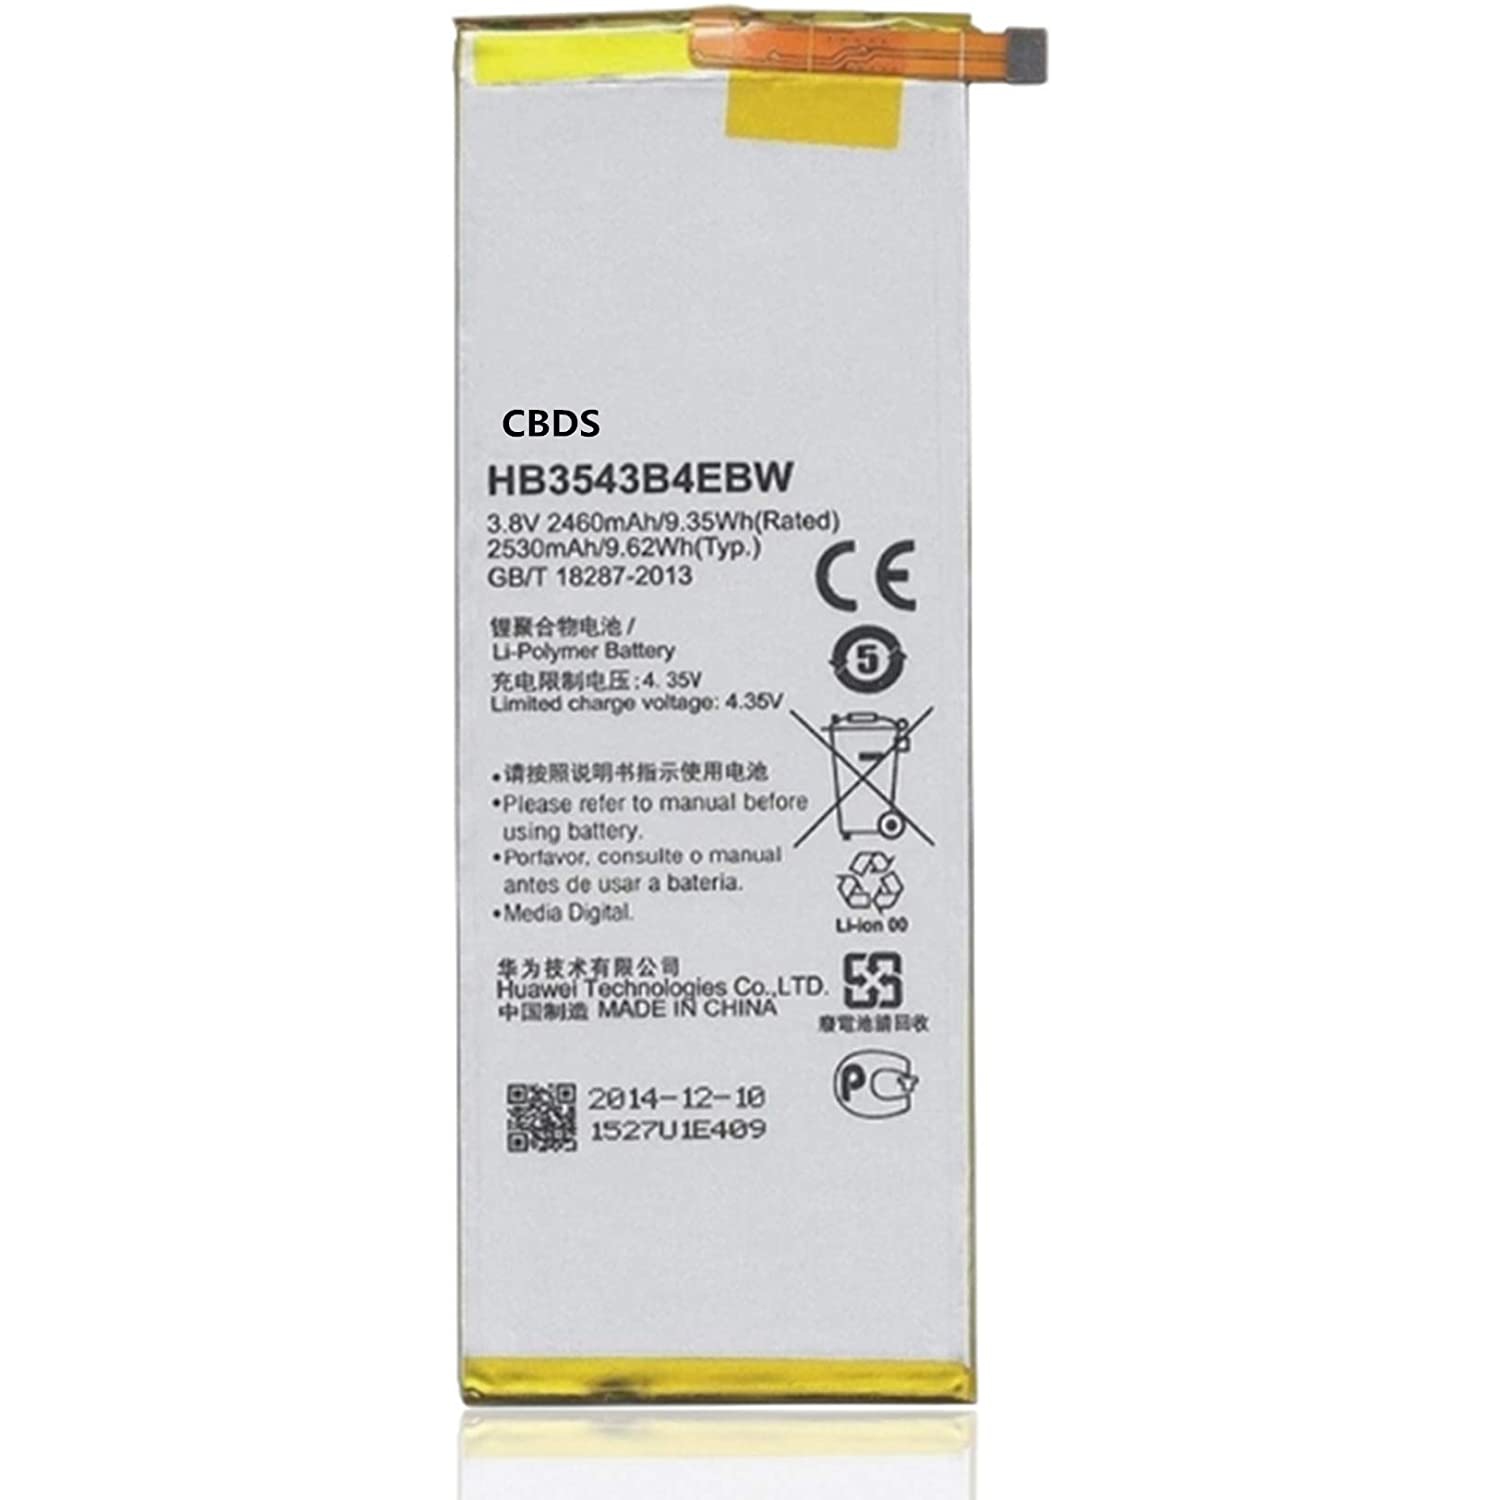 (CBDS) 2460mAh, 9.35 Wh Replacement Battery - Compatible with Huawei P7 HB3543B4EBW in Non-Retail Packaging.